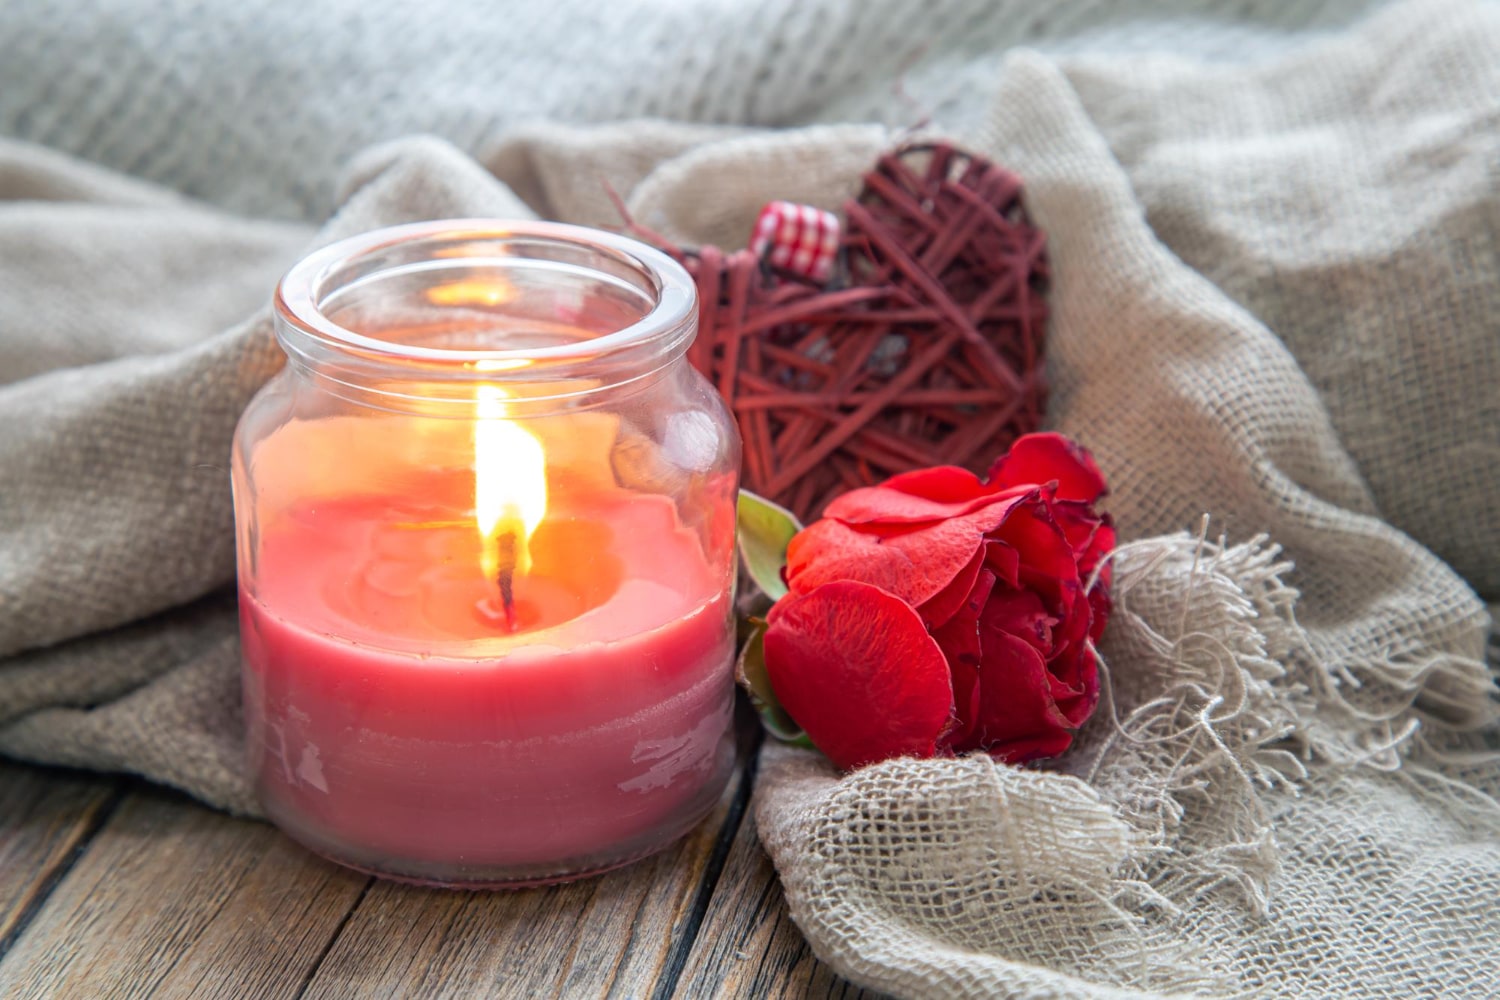 Aromatic candle with rose for International Women's Day gifts in India